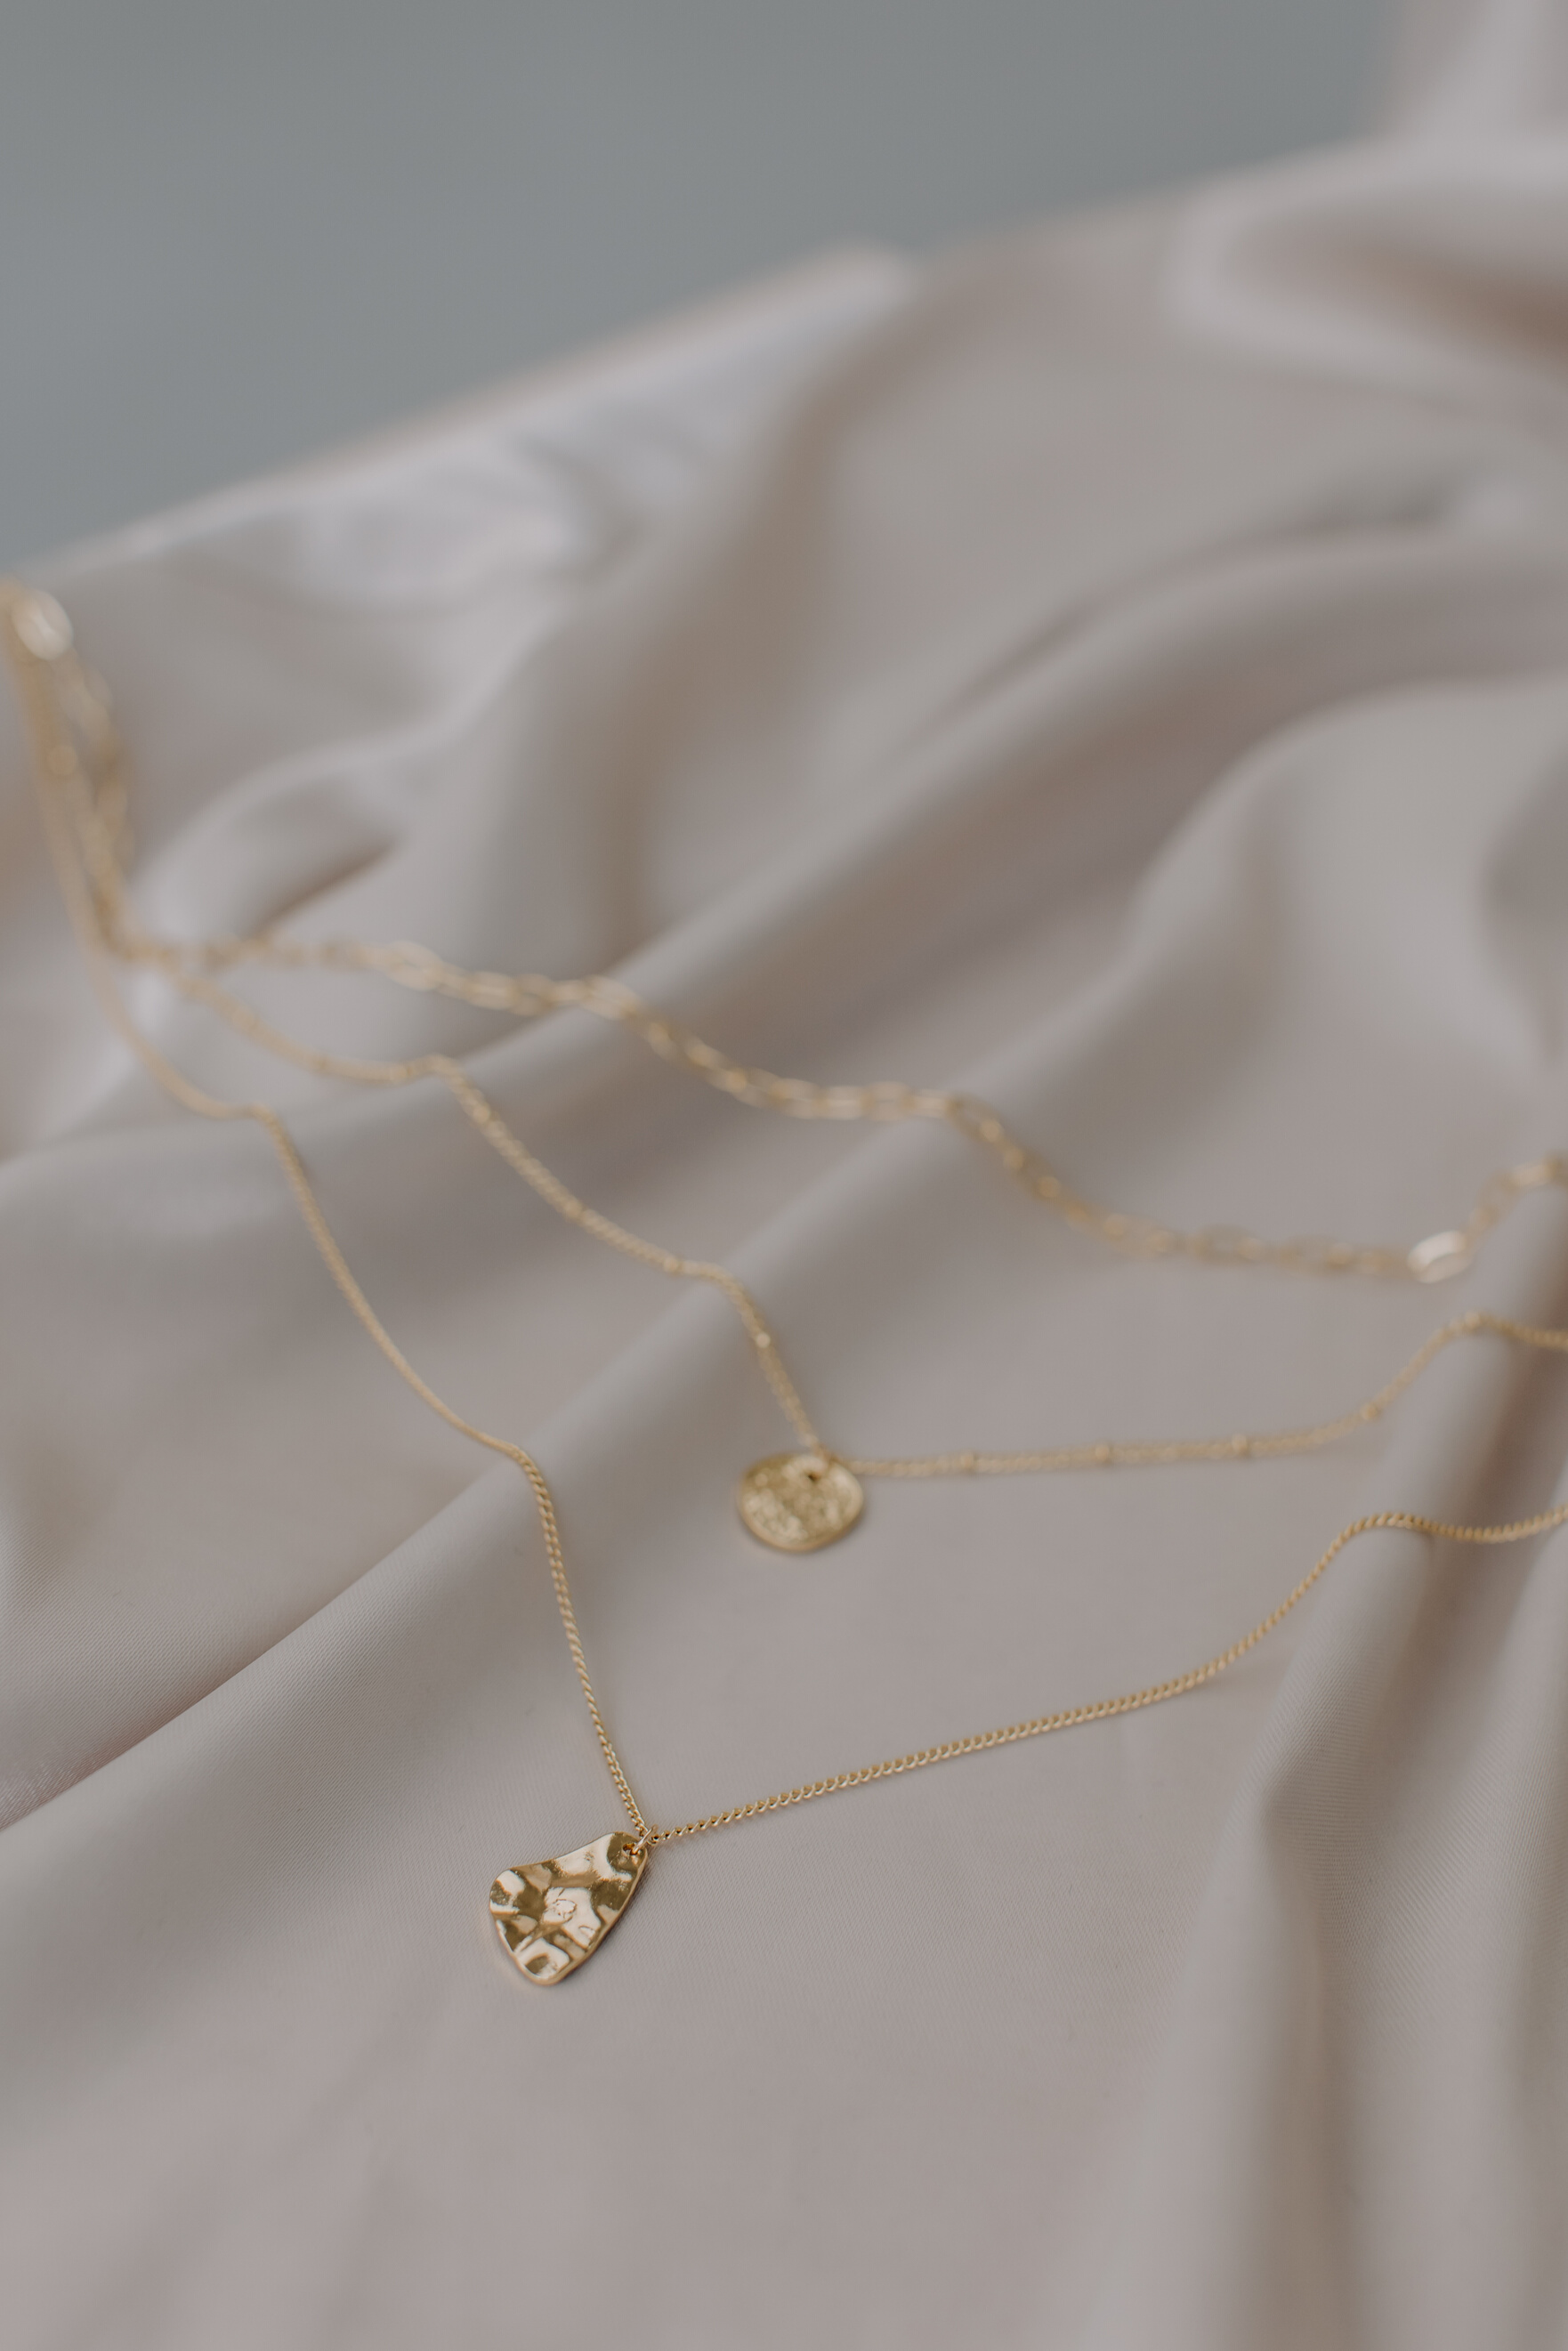 Gold Necklaces with Pendants on White Fabric